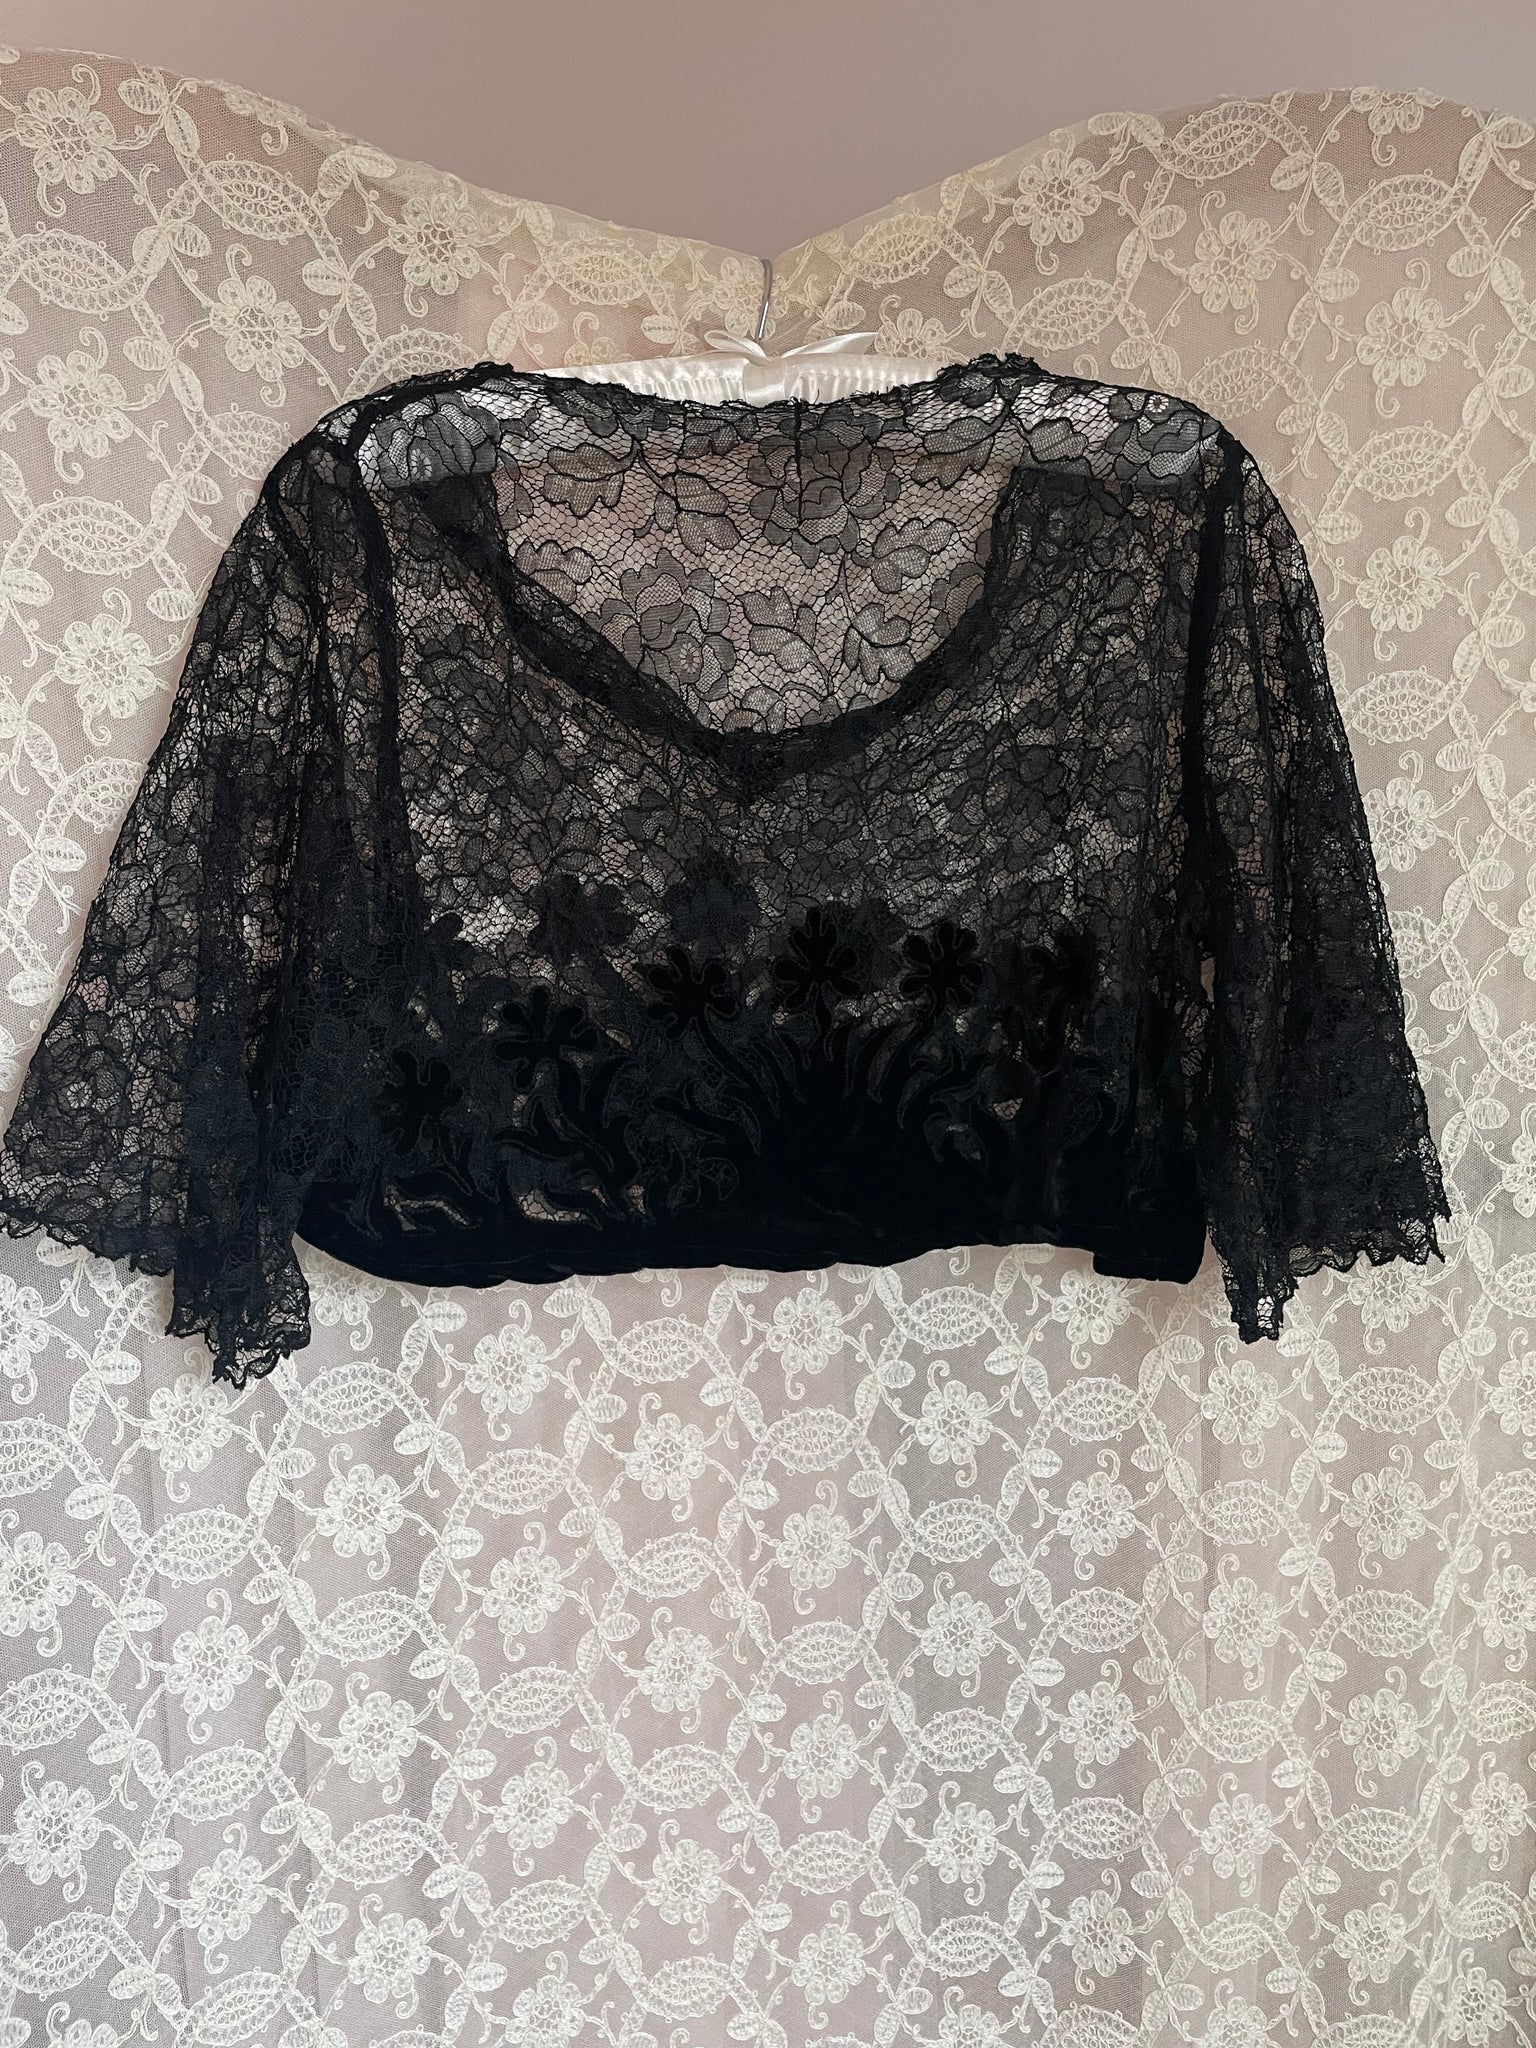 Vintage Black Applique and Lace Sheer Top Selected by Love Rocks Vintage